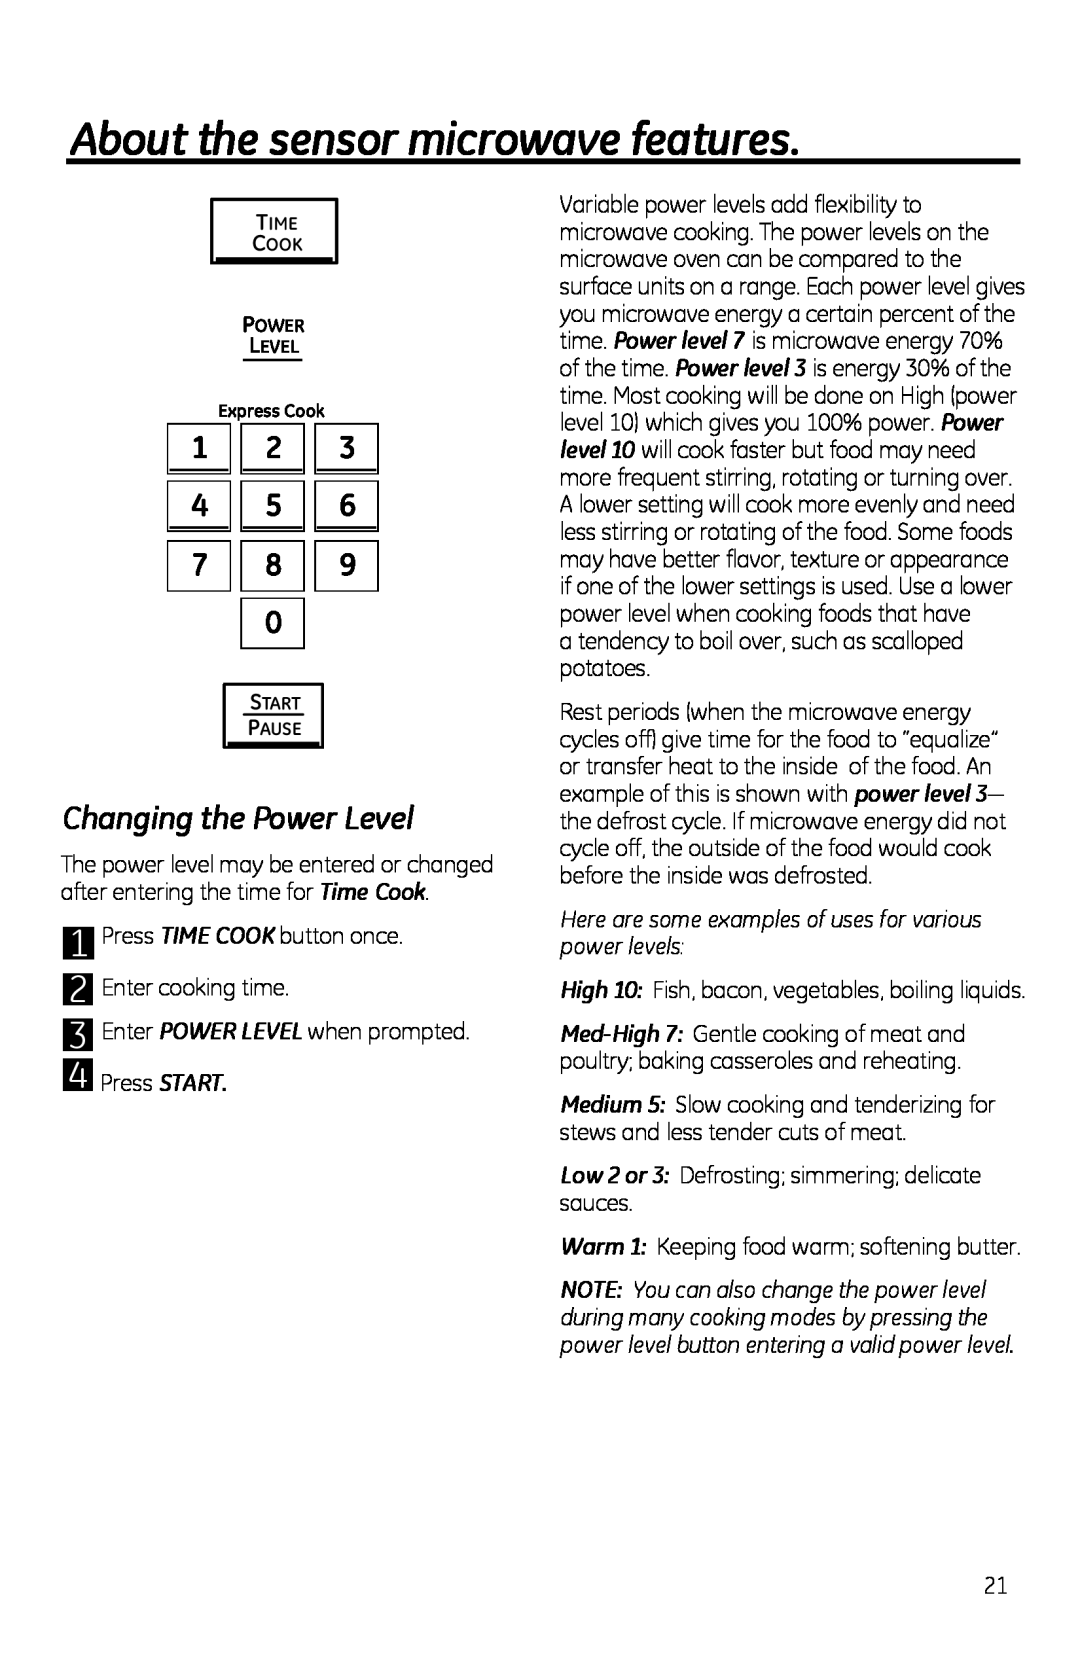 GE PVM1970 owner manual Changing the Power Level, Here are some examples of uses for various power levels, 1 2 4 5 7 8 